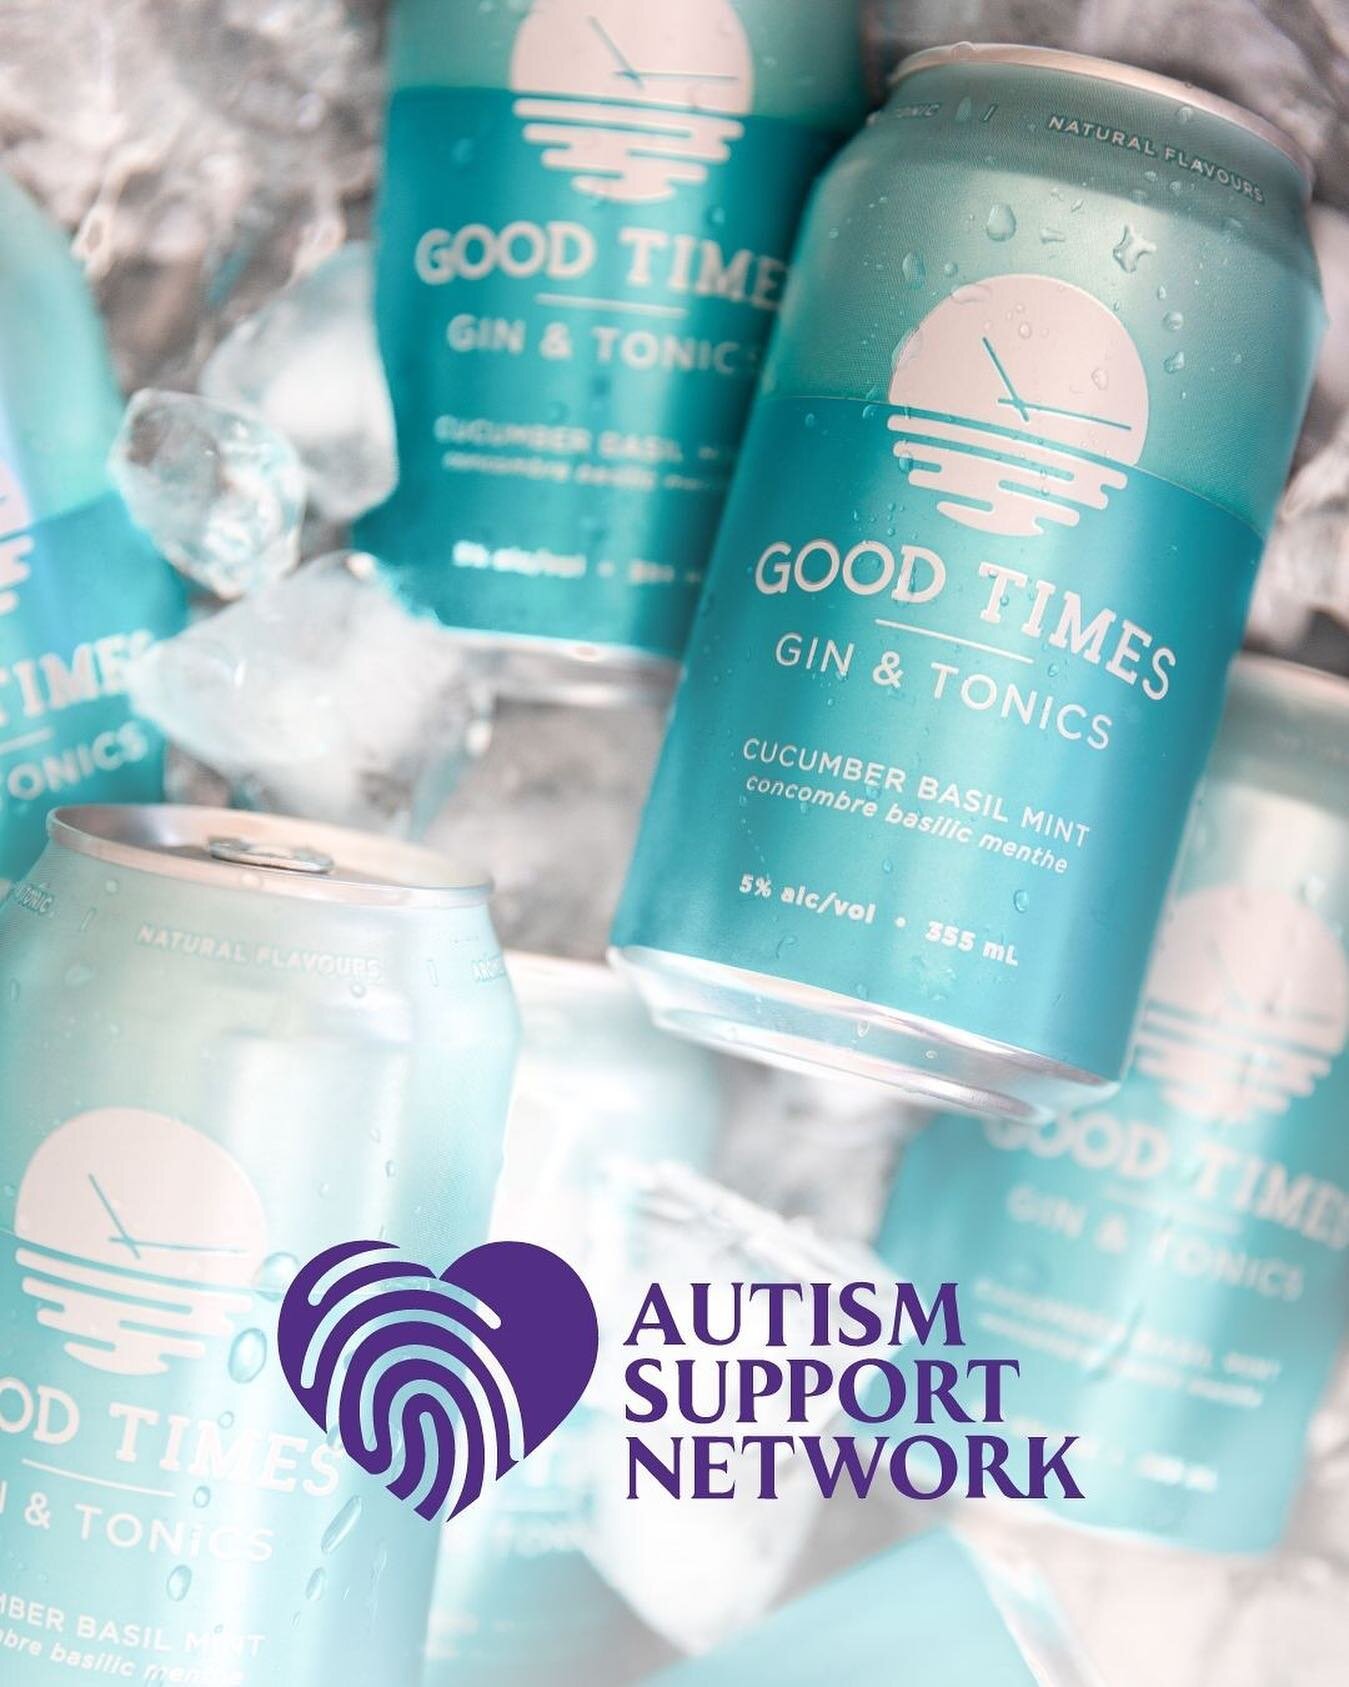 For the month of July stay refreshed and help us raise awareness for the @autismsupportnetwork💙 ⁣
⁣
This amazing organization connects families with the resources and support they need in their journey with an autism diagnosis. ⁣
⁣
For the entire mo